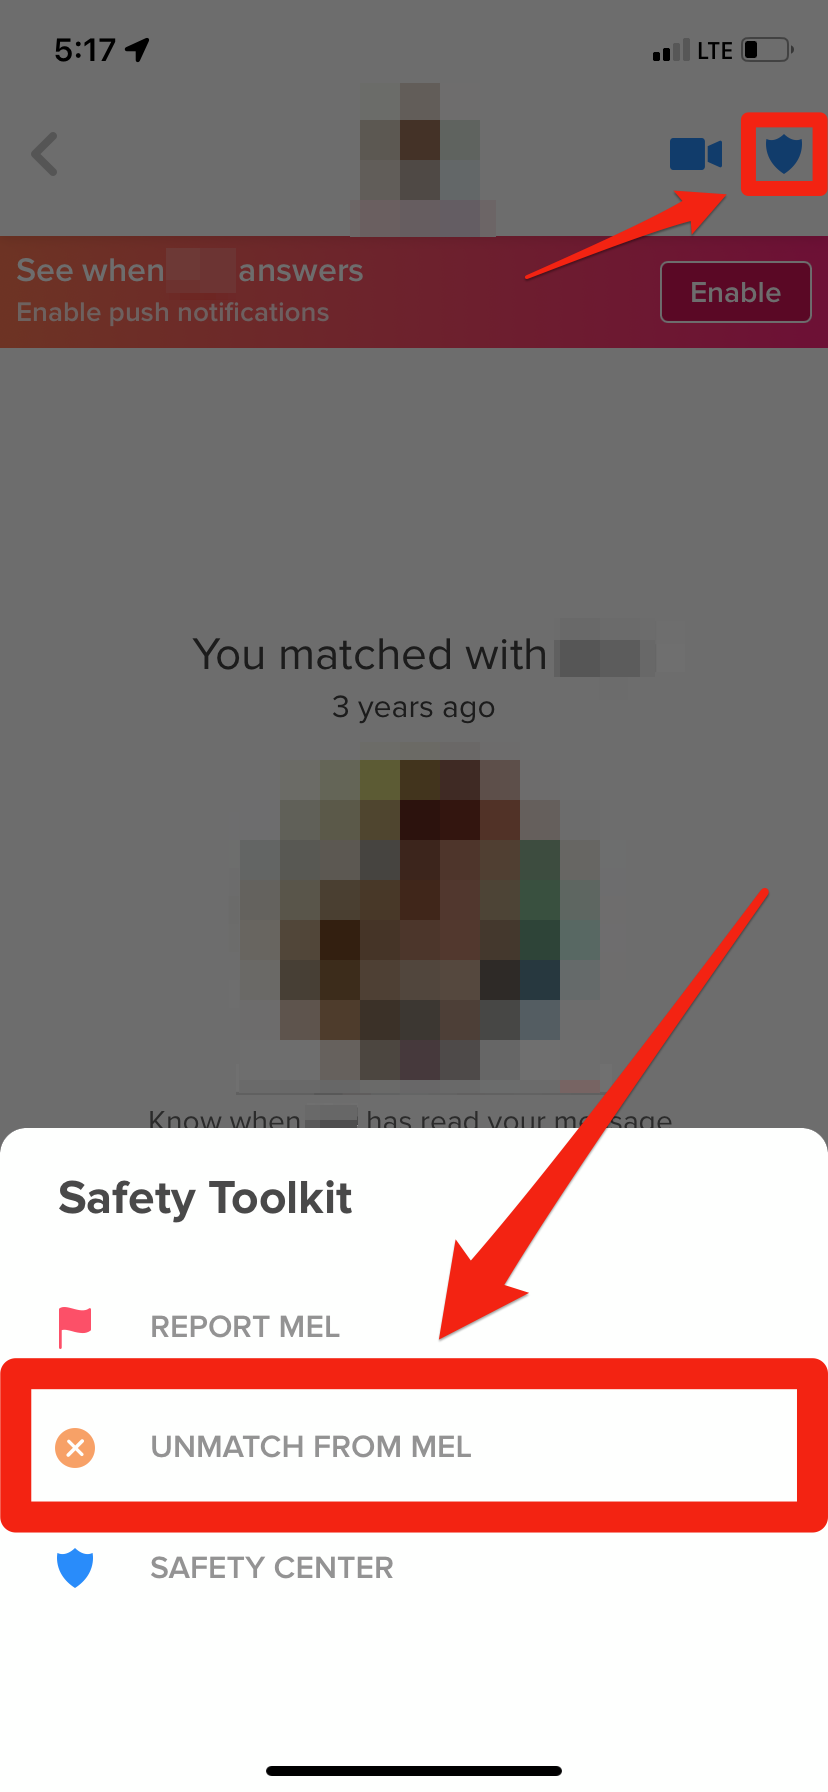 The option that lets you unmatch from someone on Tinder.